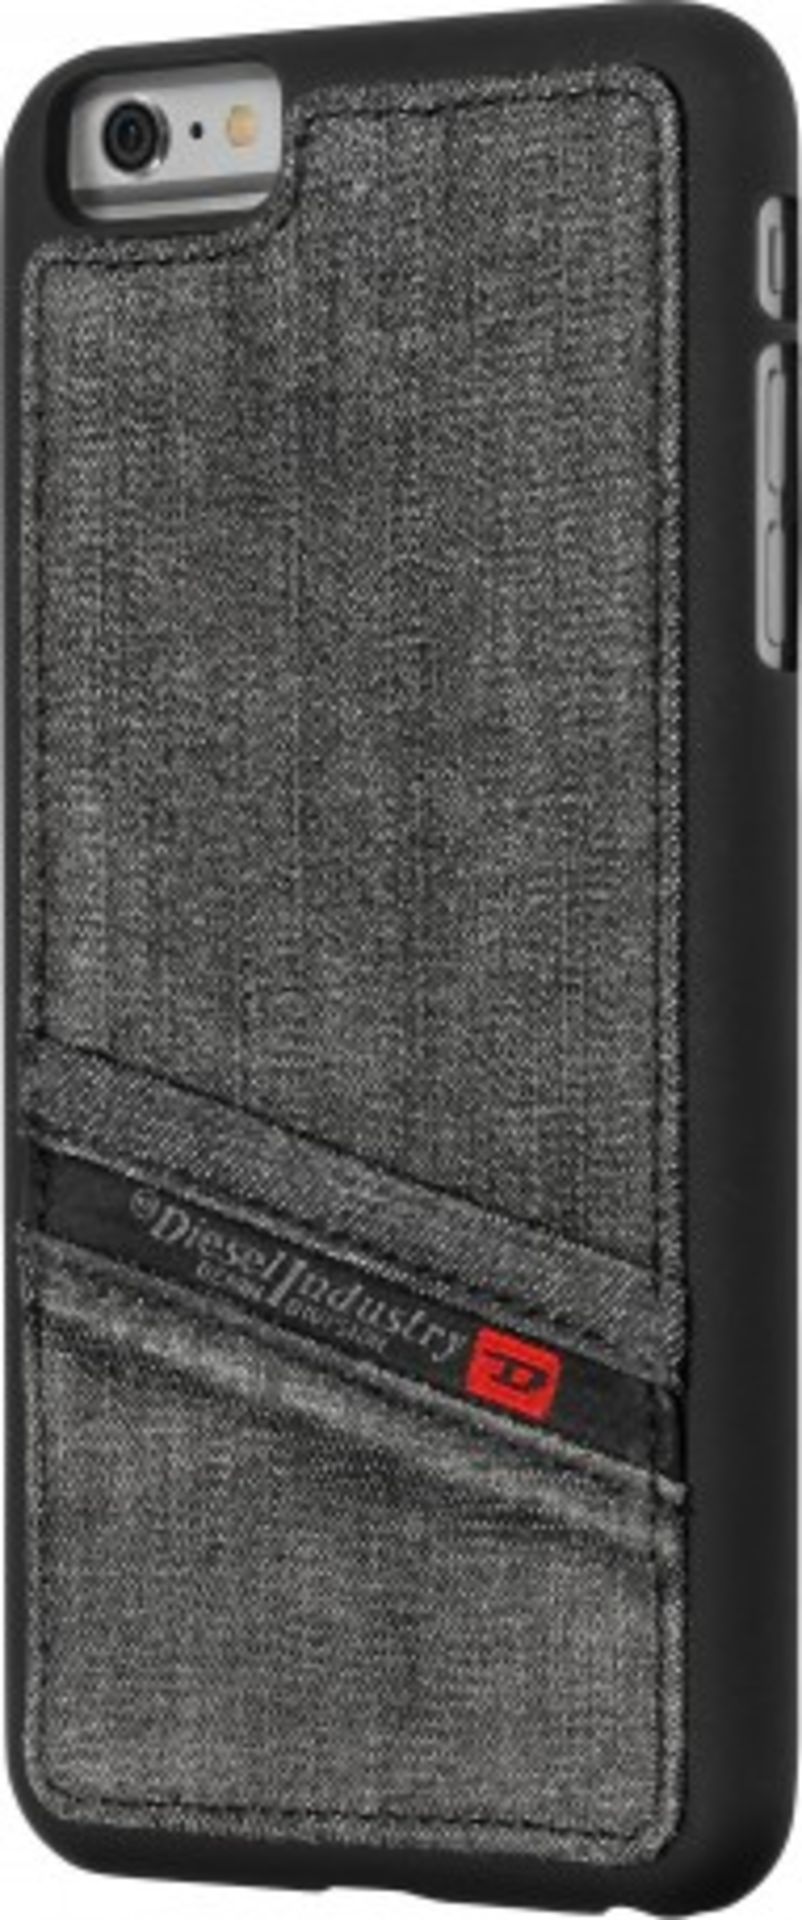 V *TRADE QTY* Brand New Diesel Pluton Pocket Snap Case For iPhone 6/6S Black RRP £21.99 Amazon Price